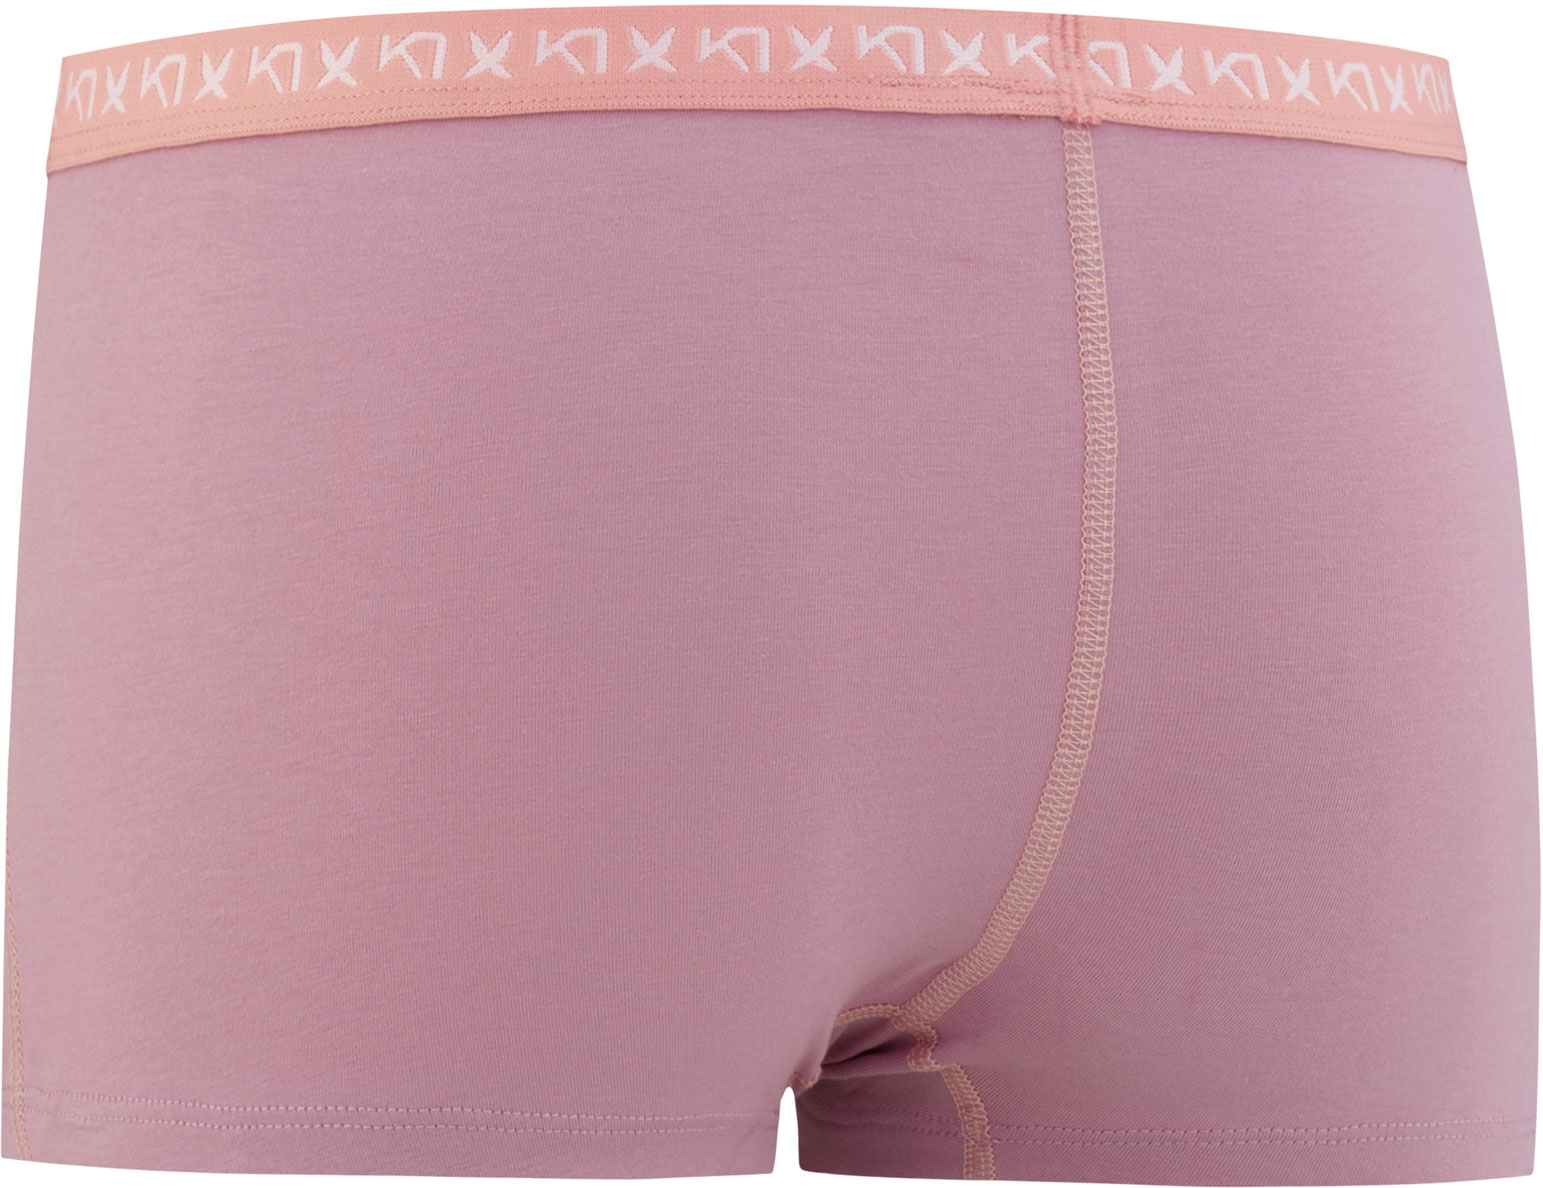 Women's hipster underpants